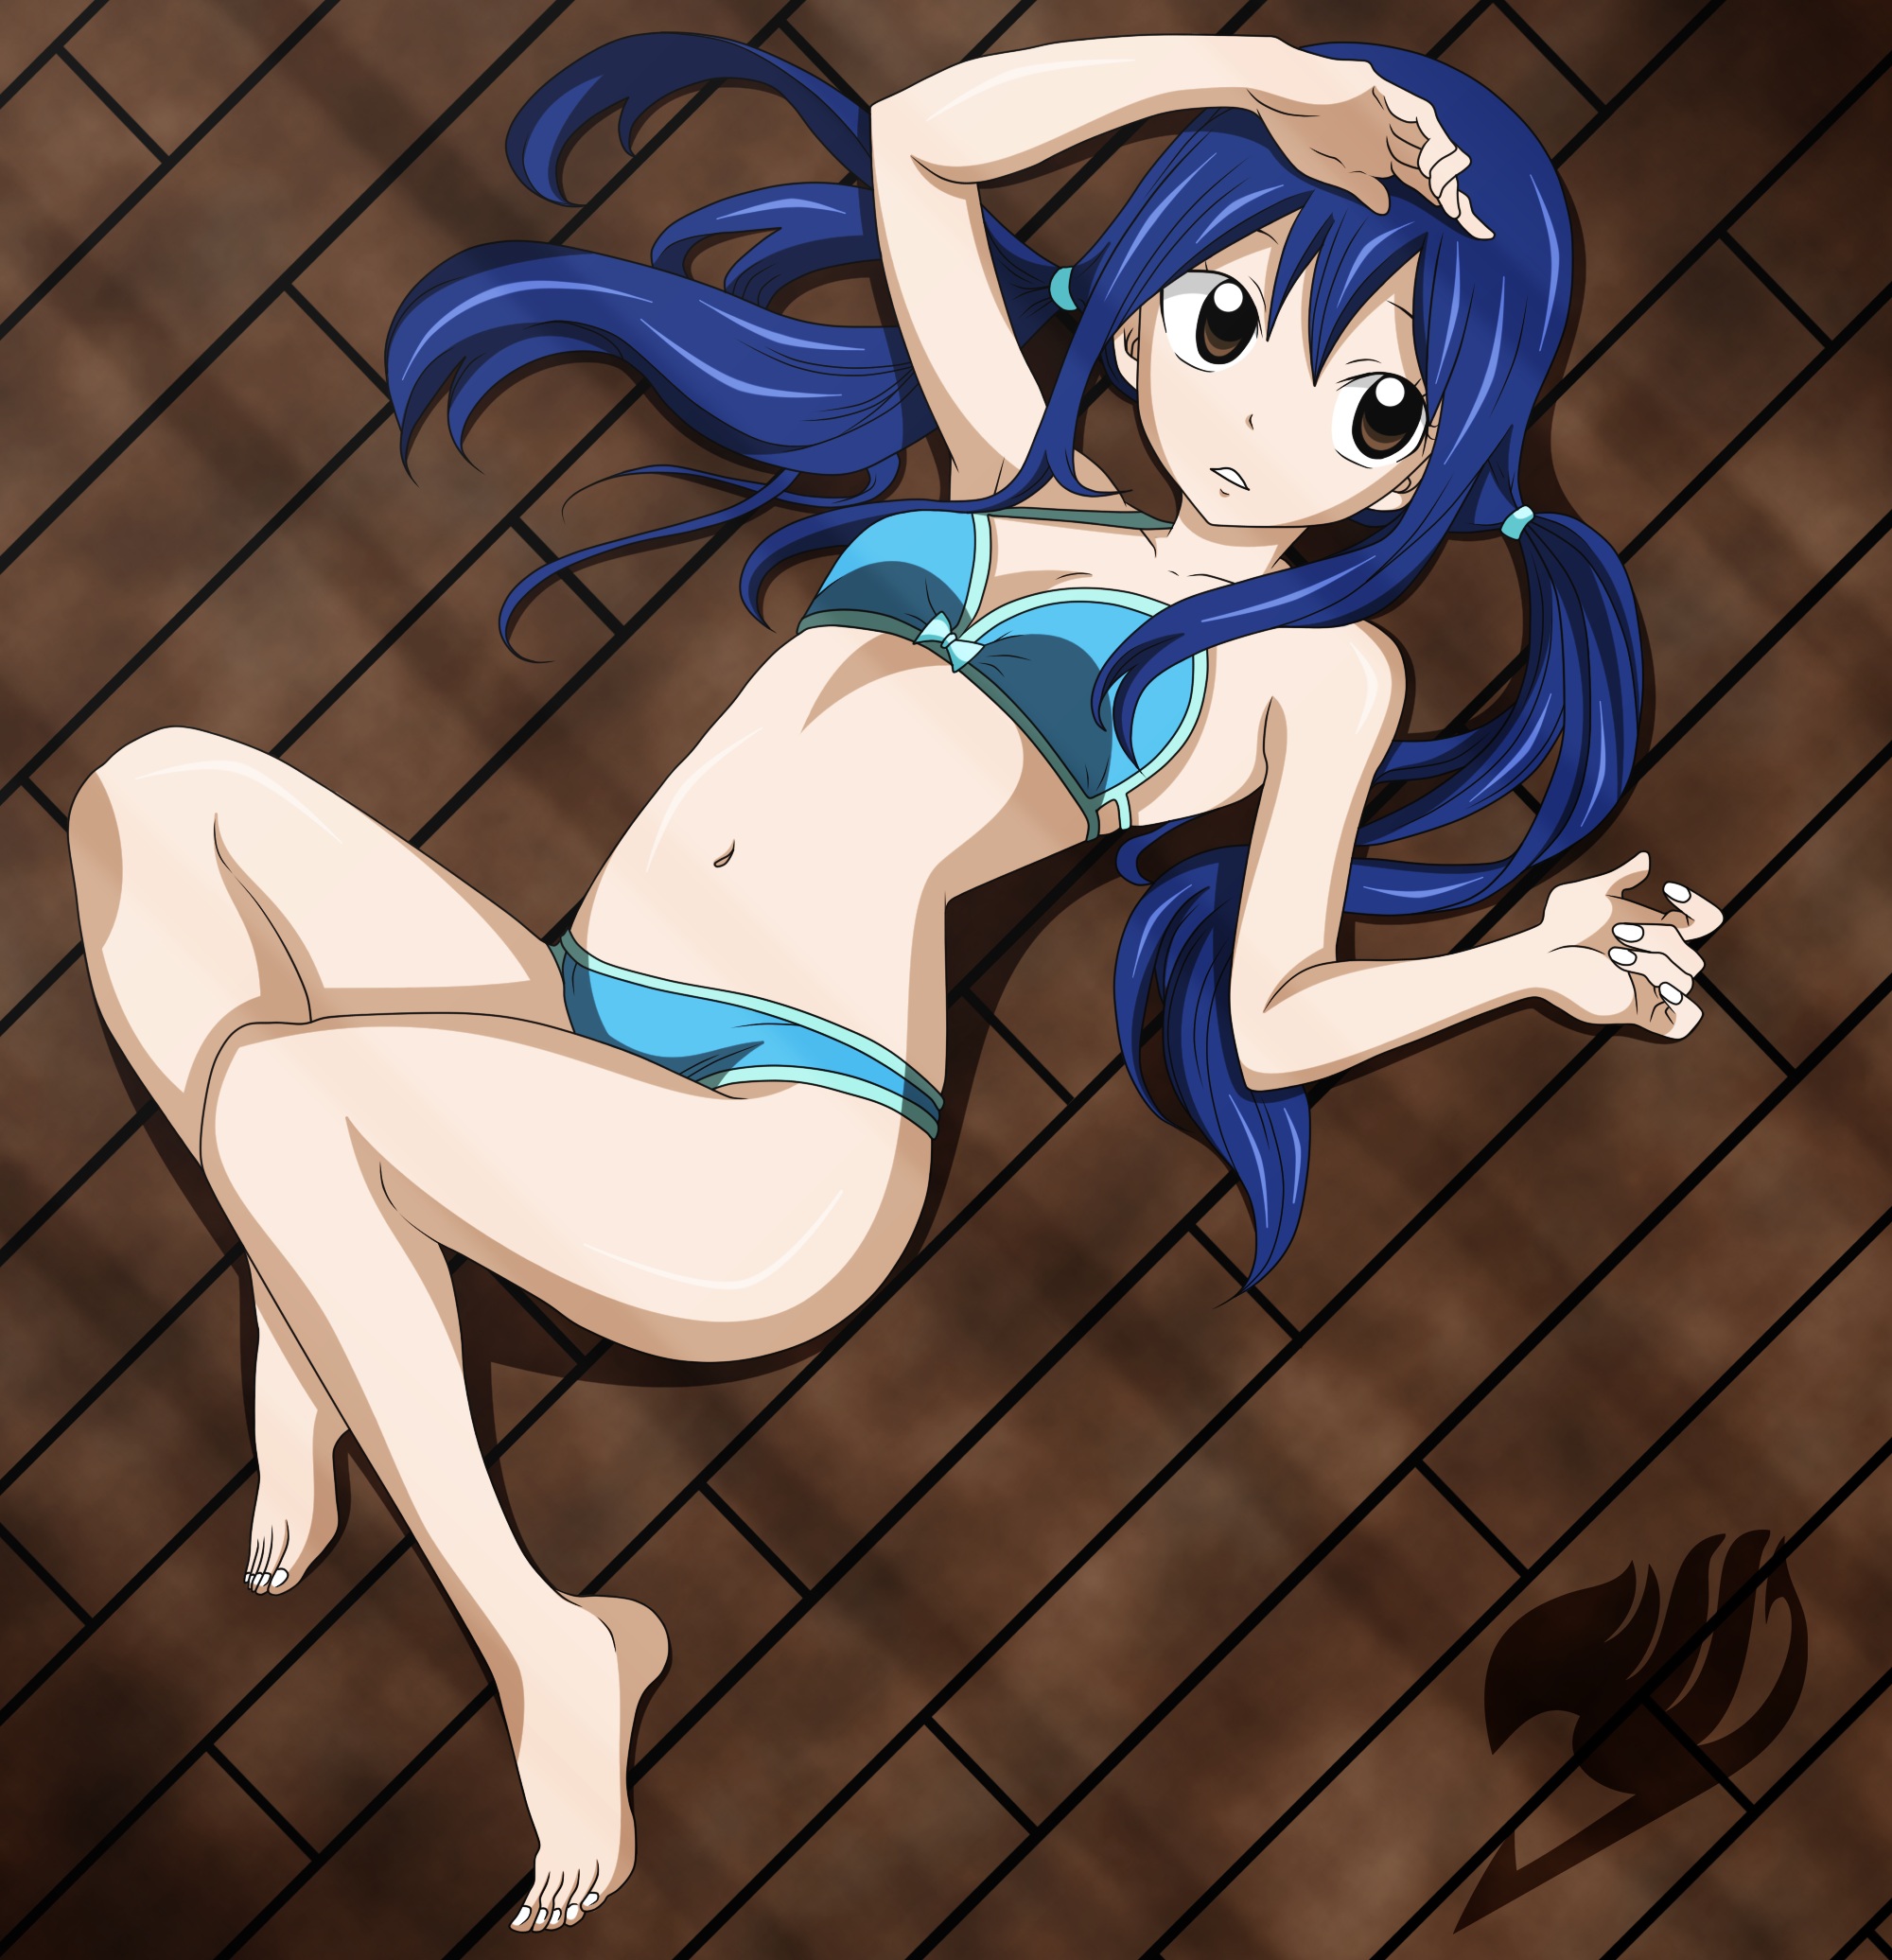 fairy_tail wendy_marvell_by_maddog05-d5i0zt9.jpg.